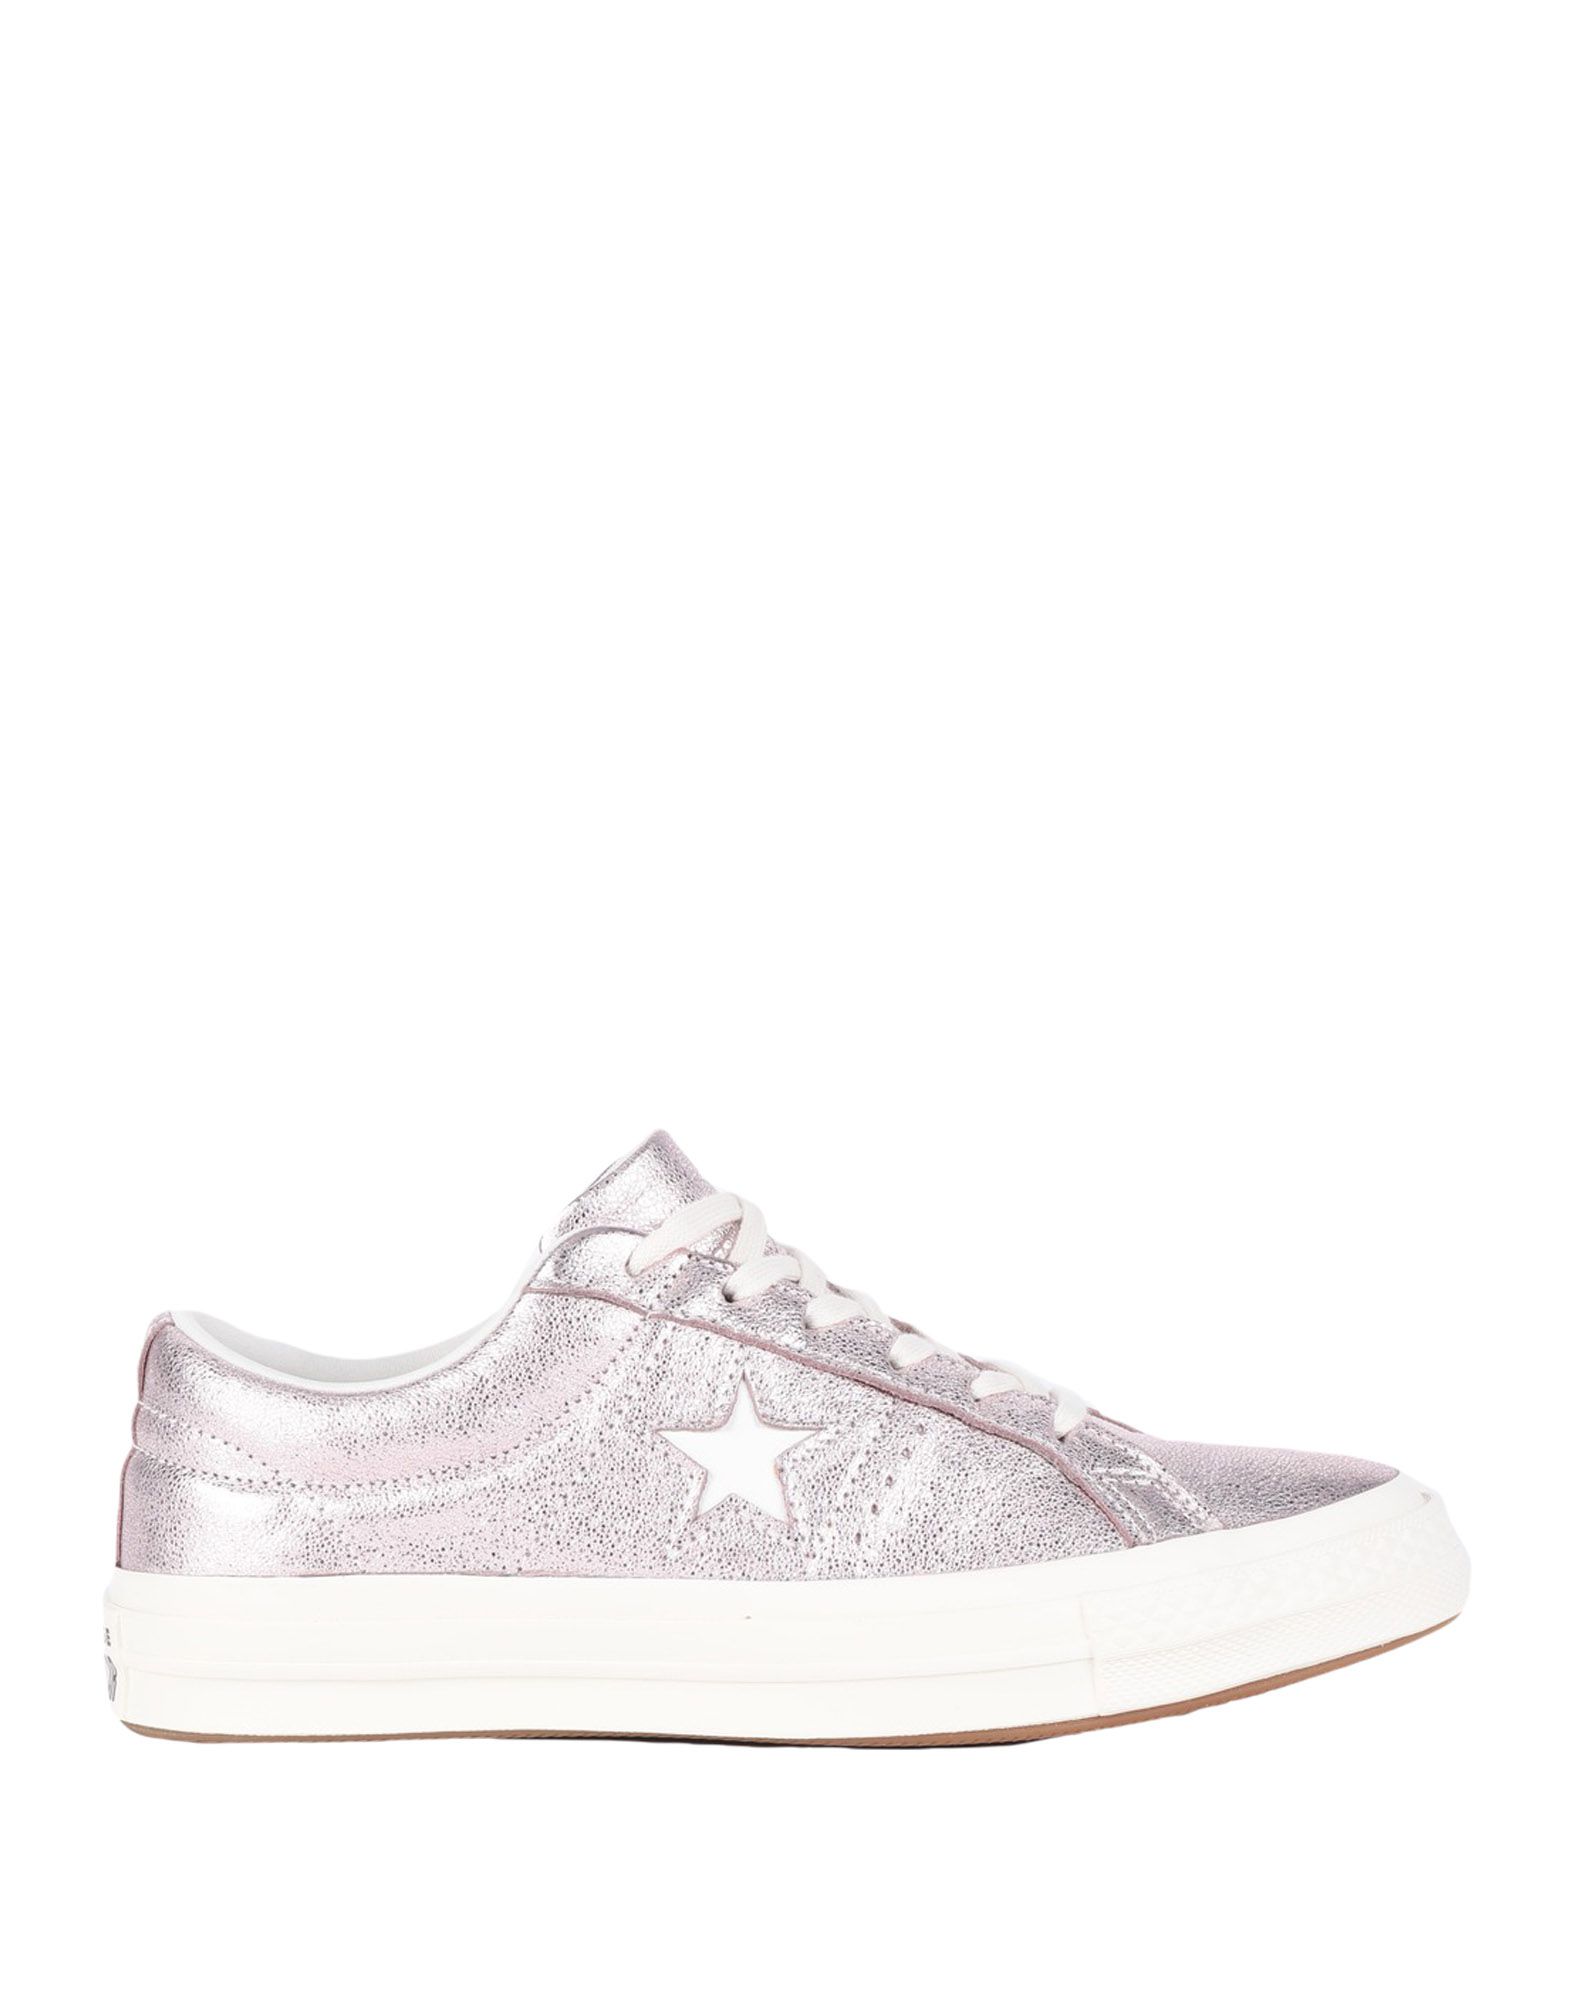 converse one star sneakers